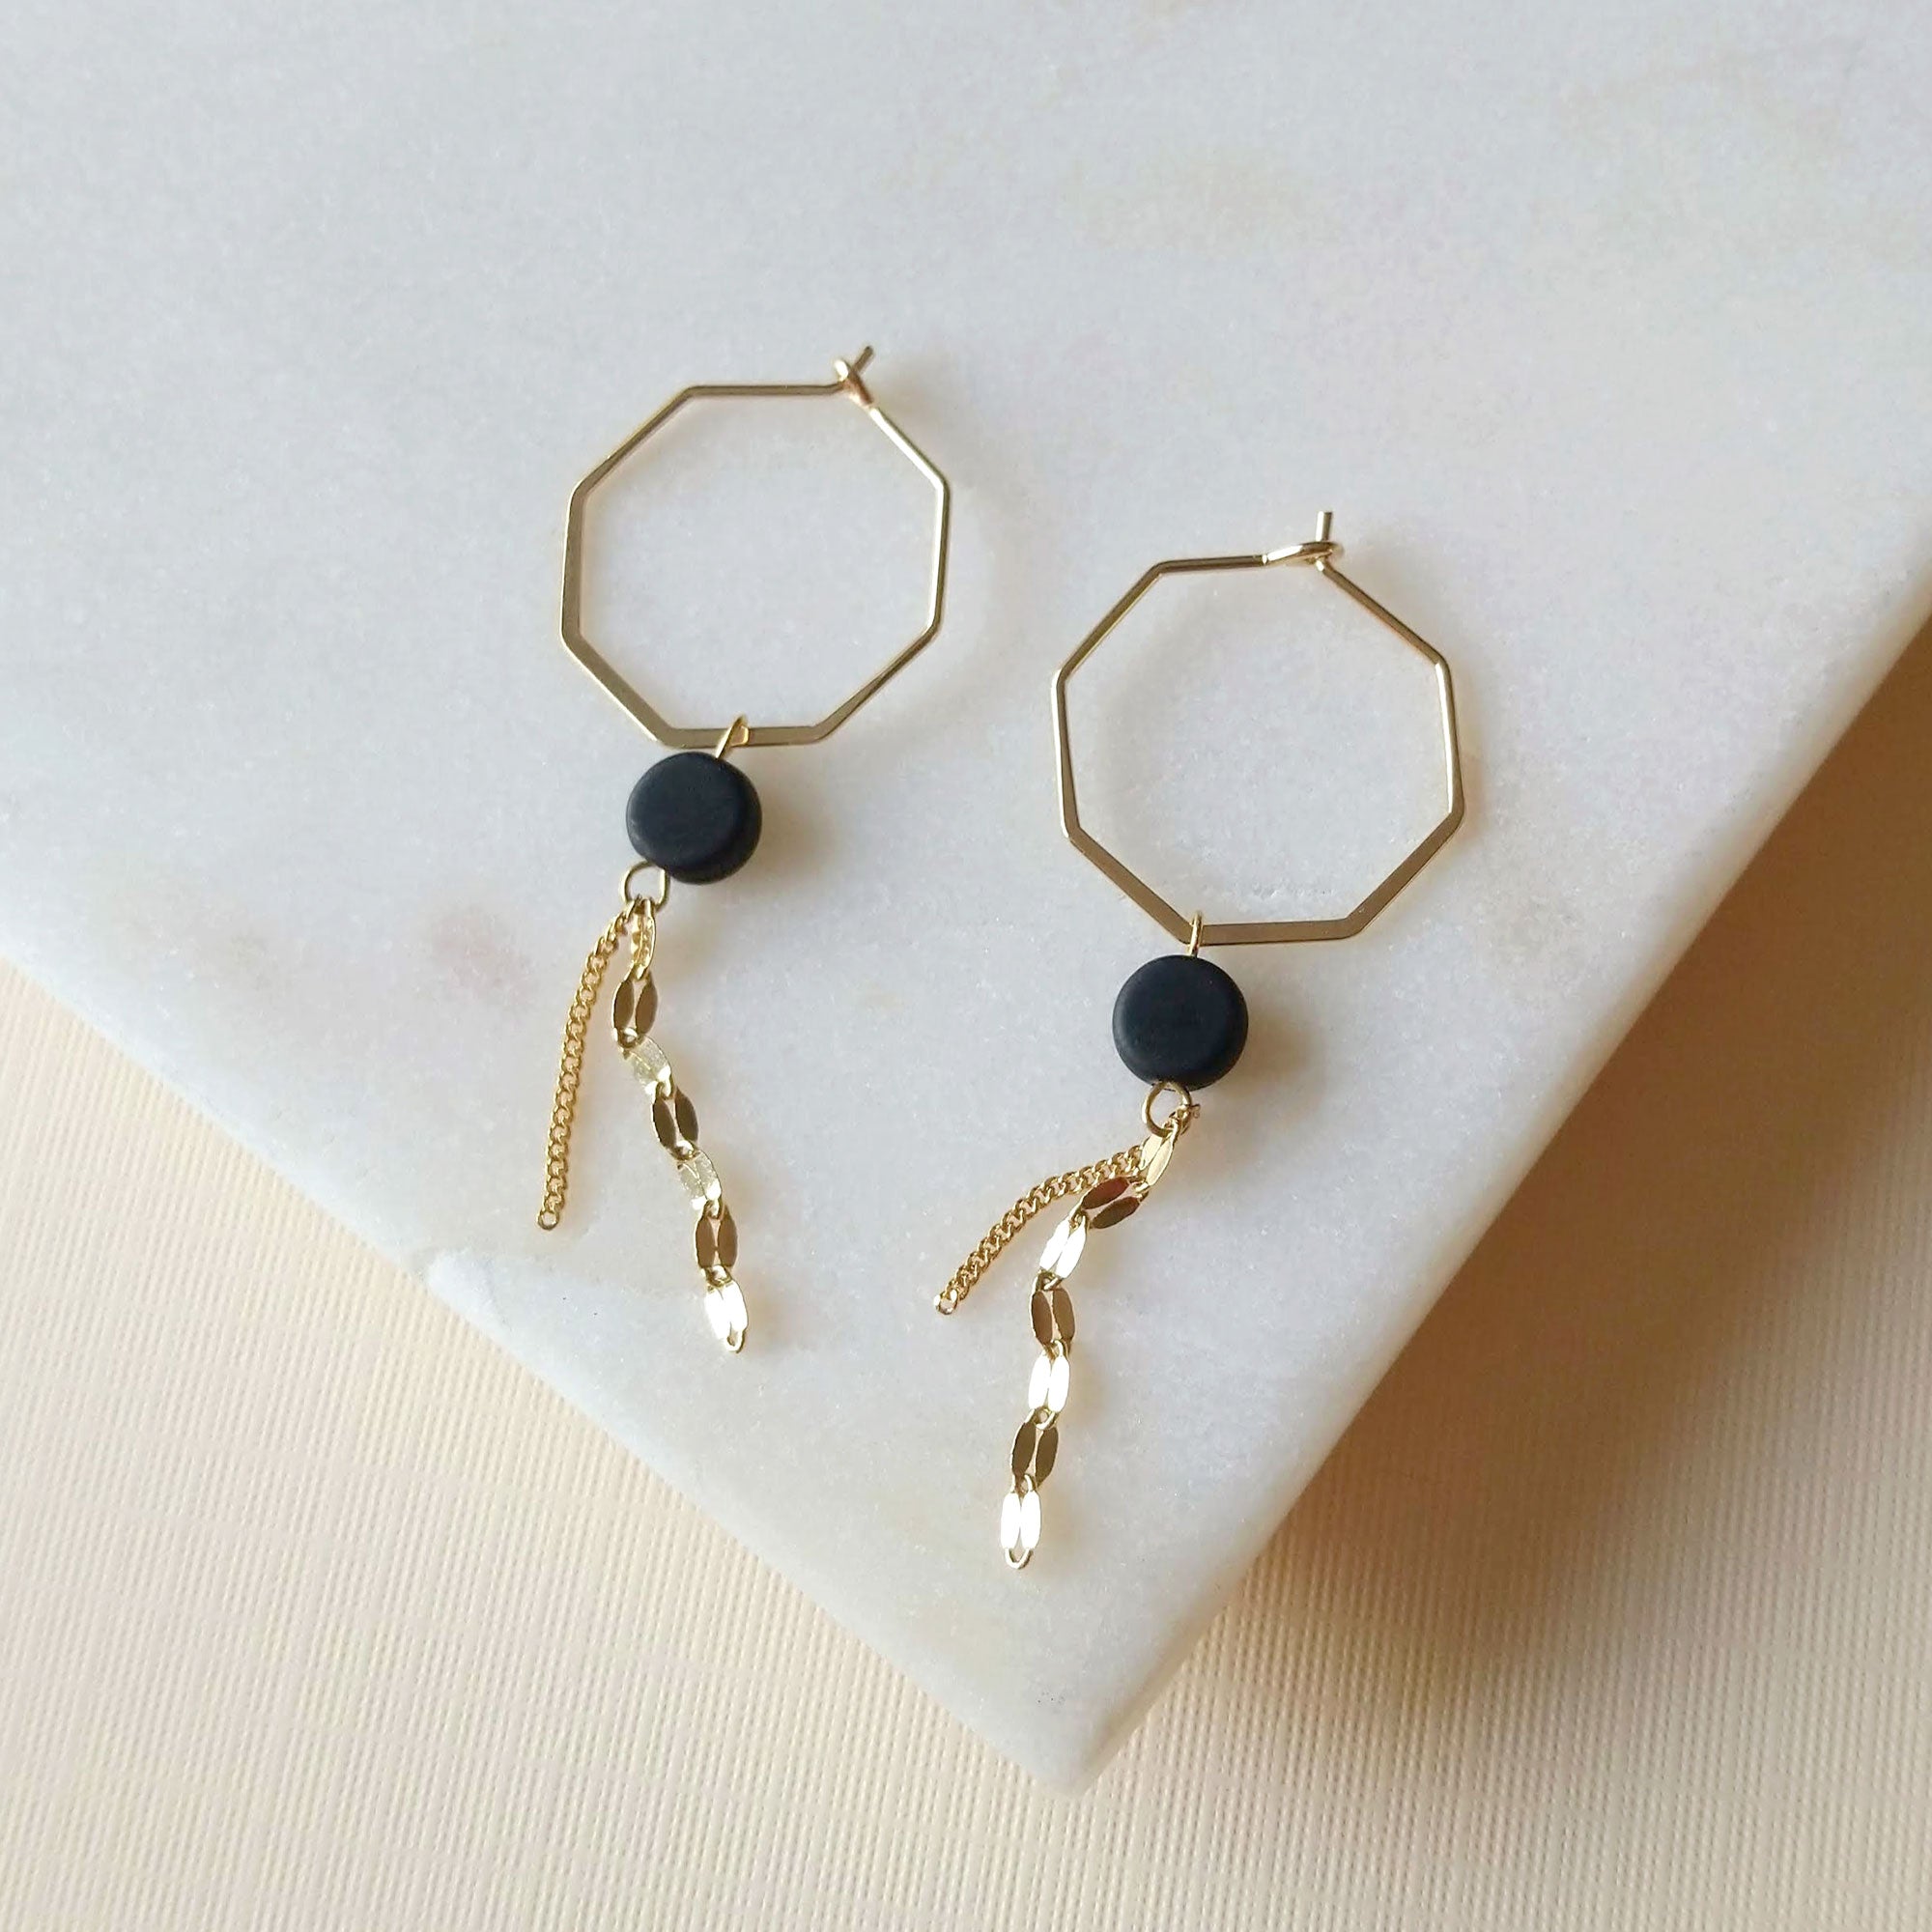 hoops and chains earrings